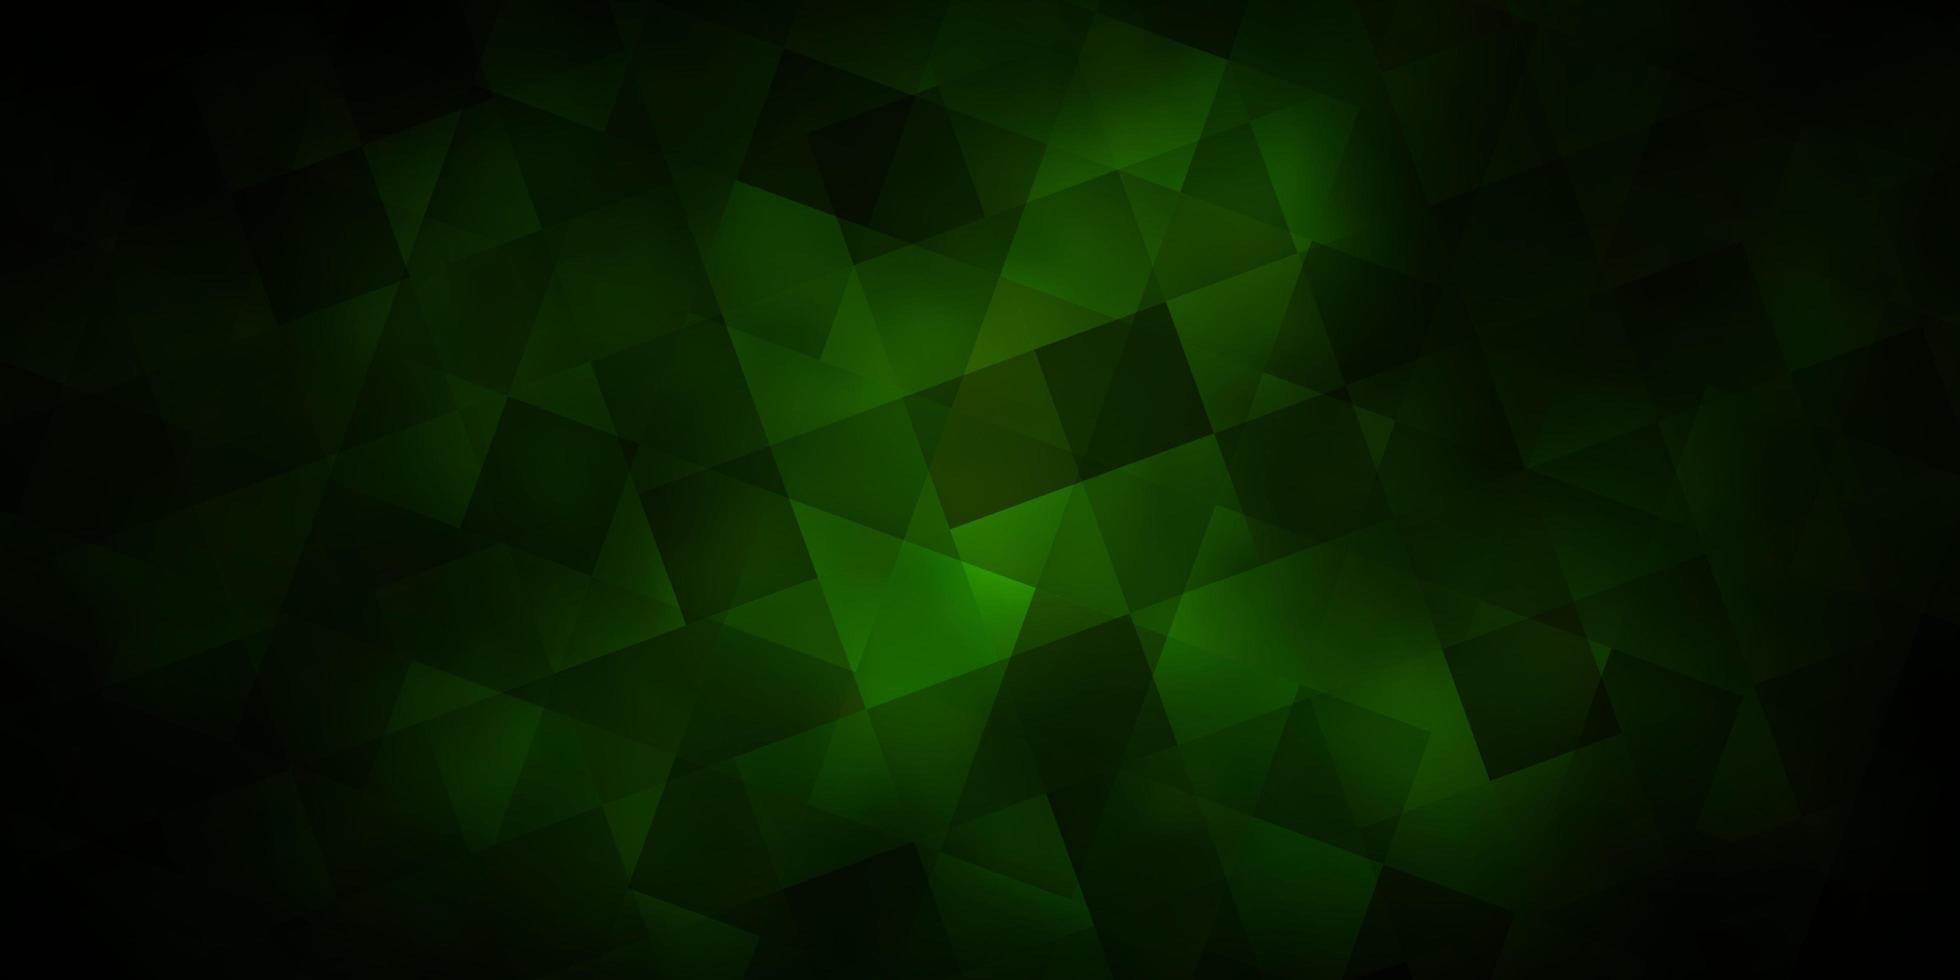 Dark Green vector layout with rectangles, triangles.